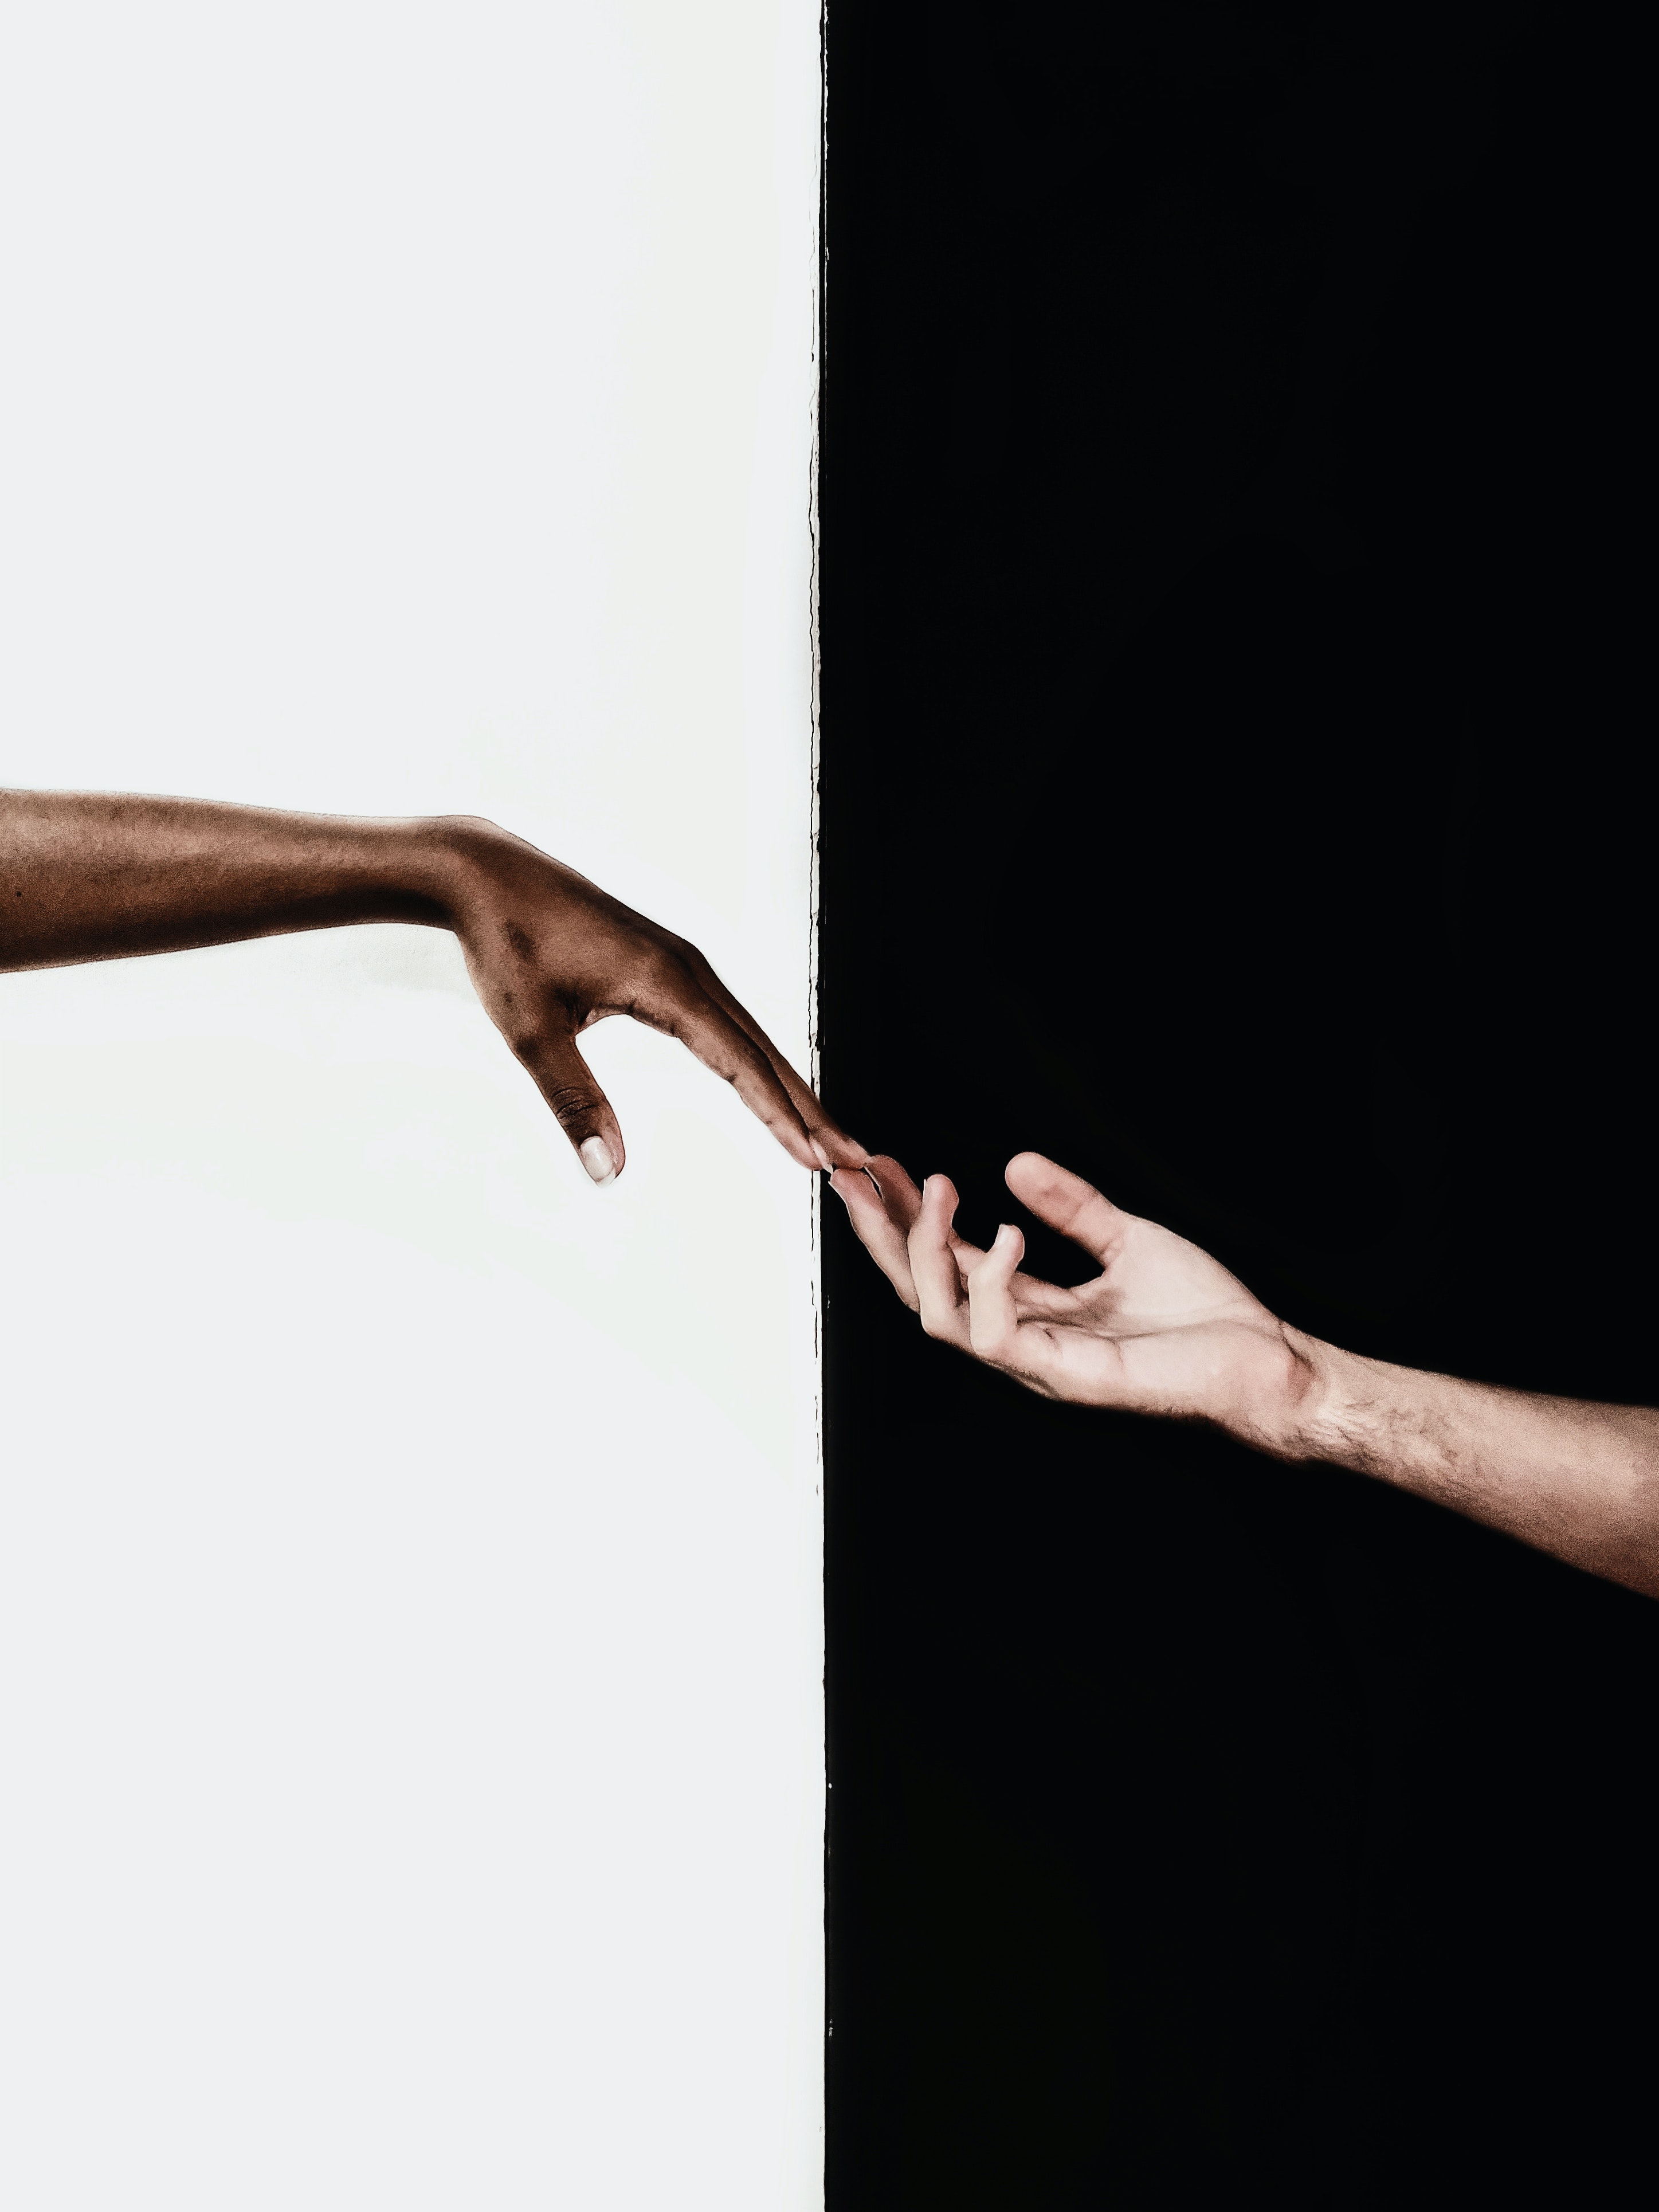 Two individuals touching fingers. | Source: Pexels